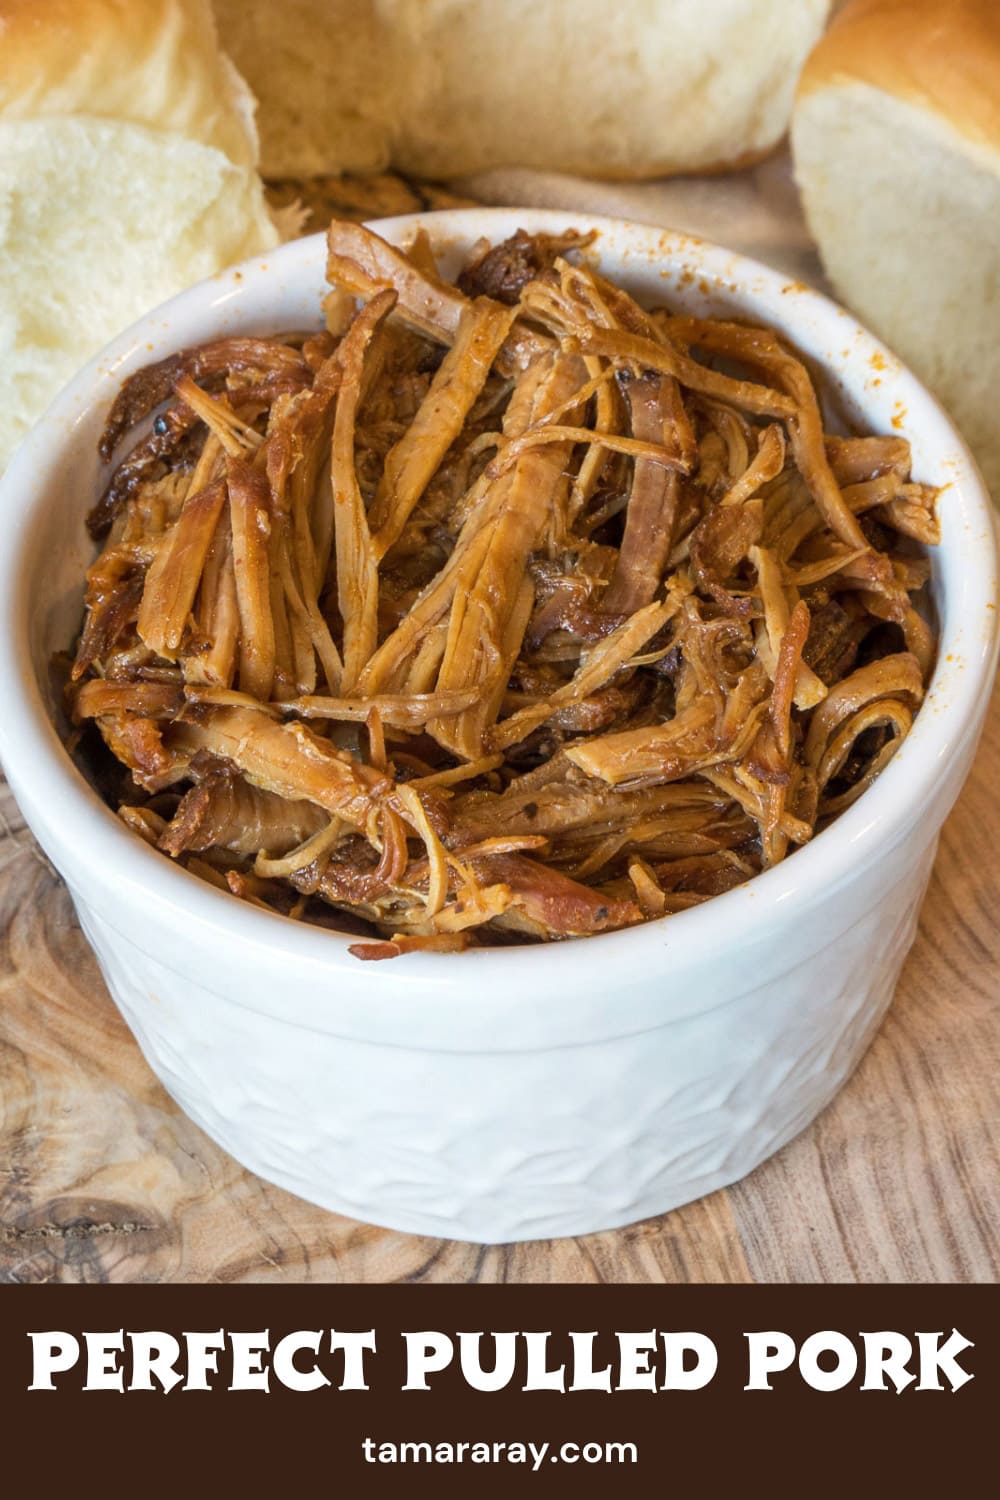 Perfect pulled pork recipe made in the instant pot.